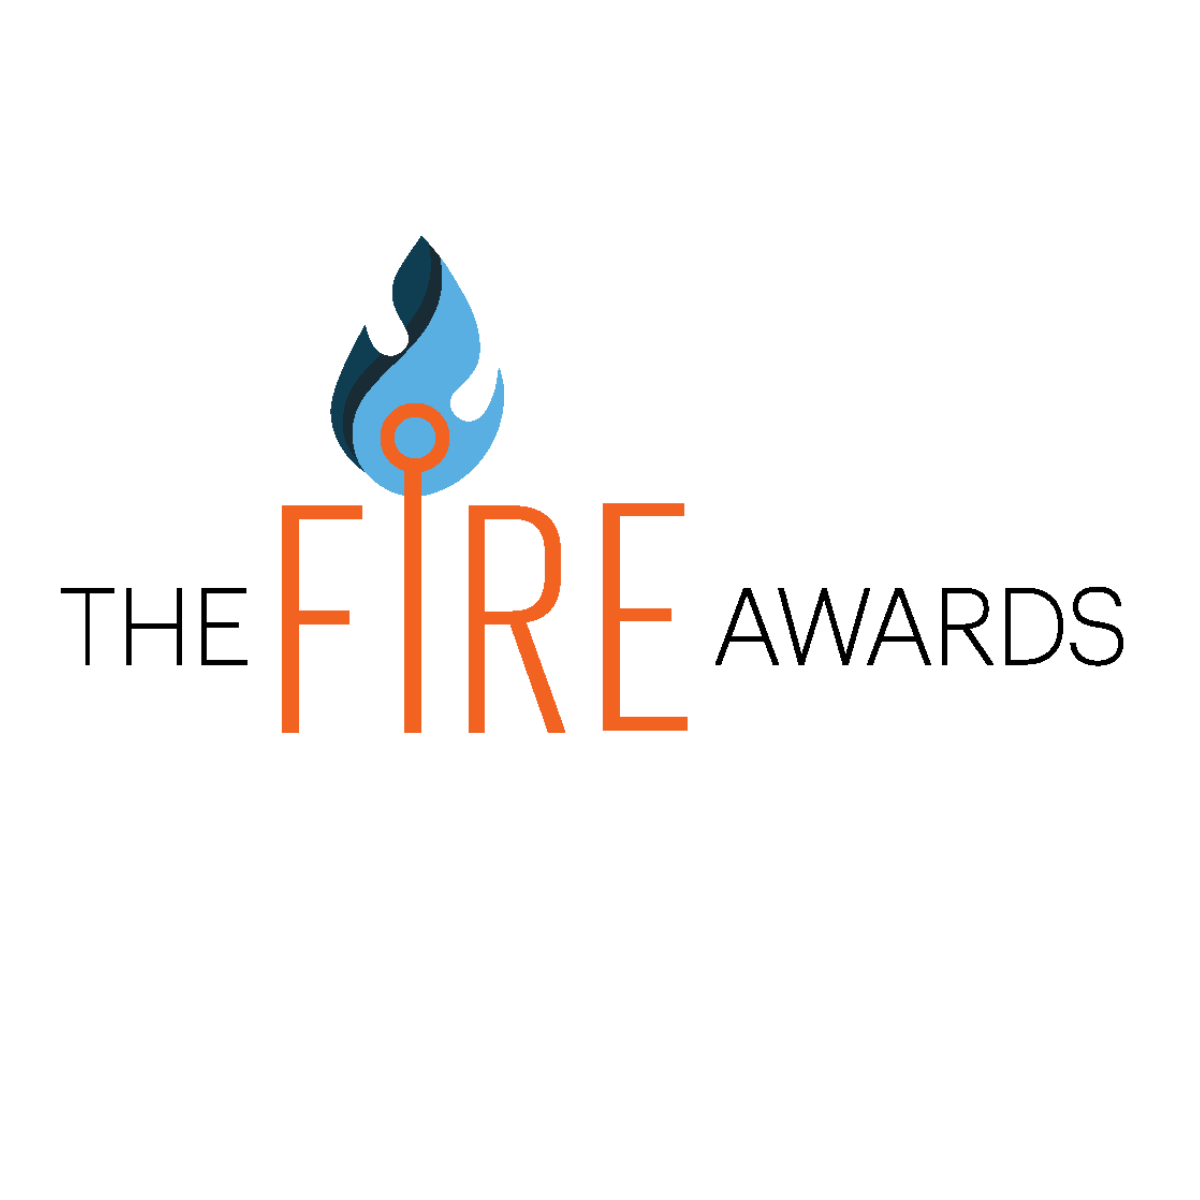 The Fire Awards